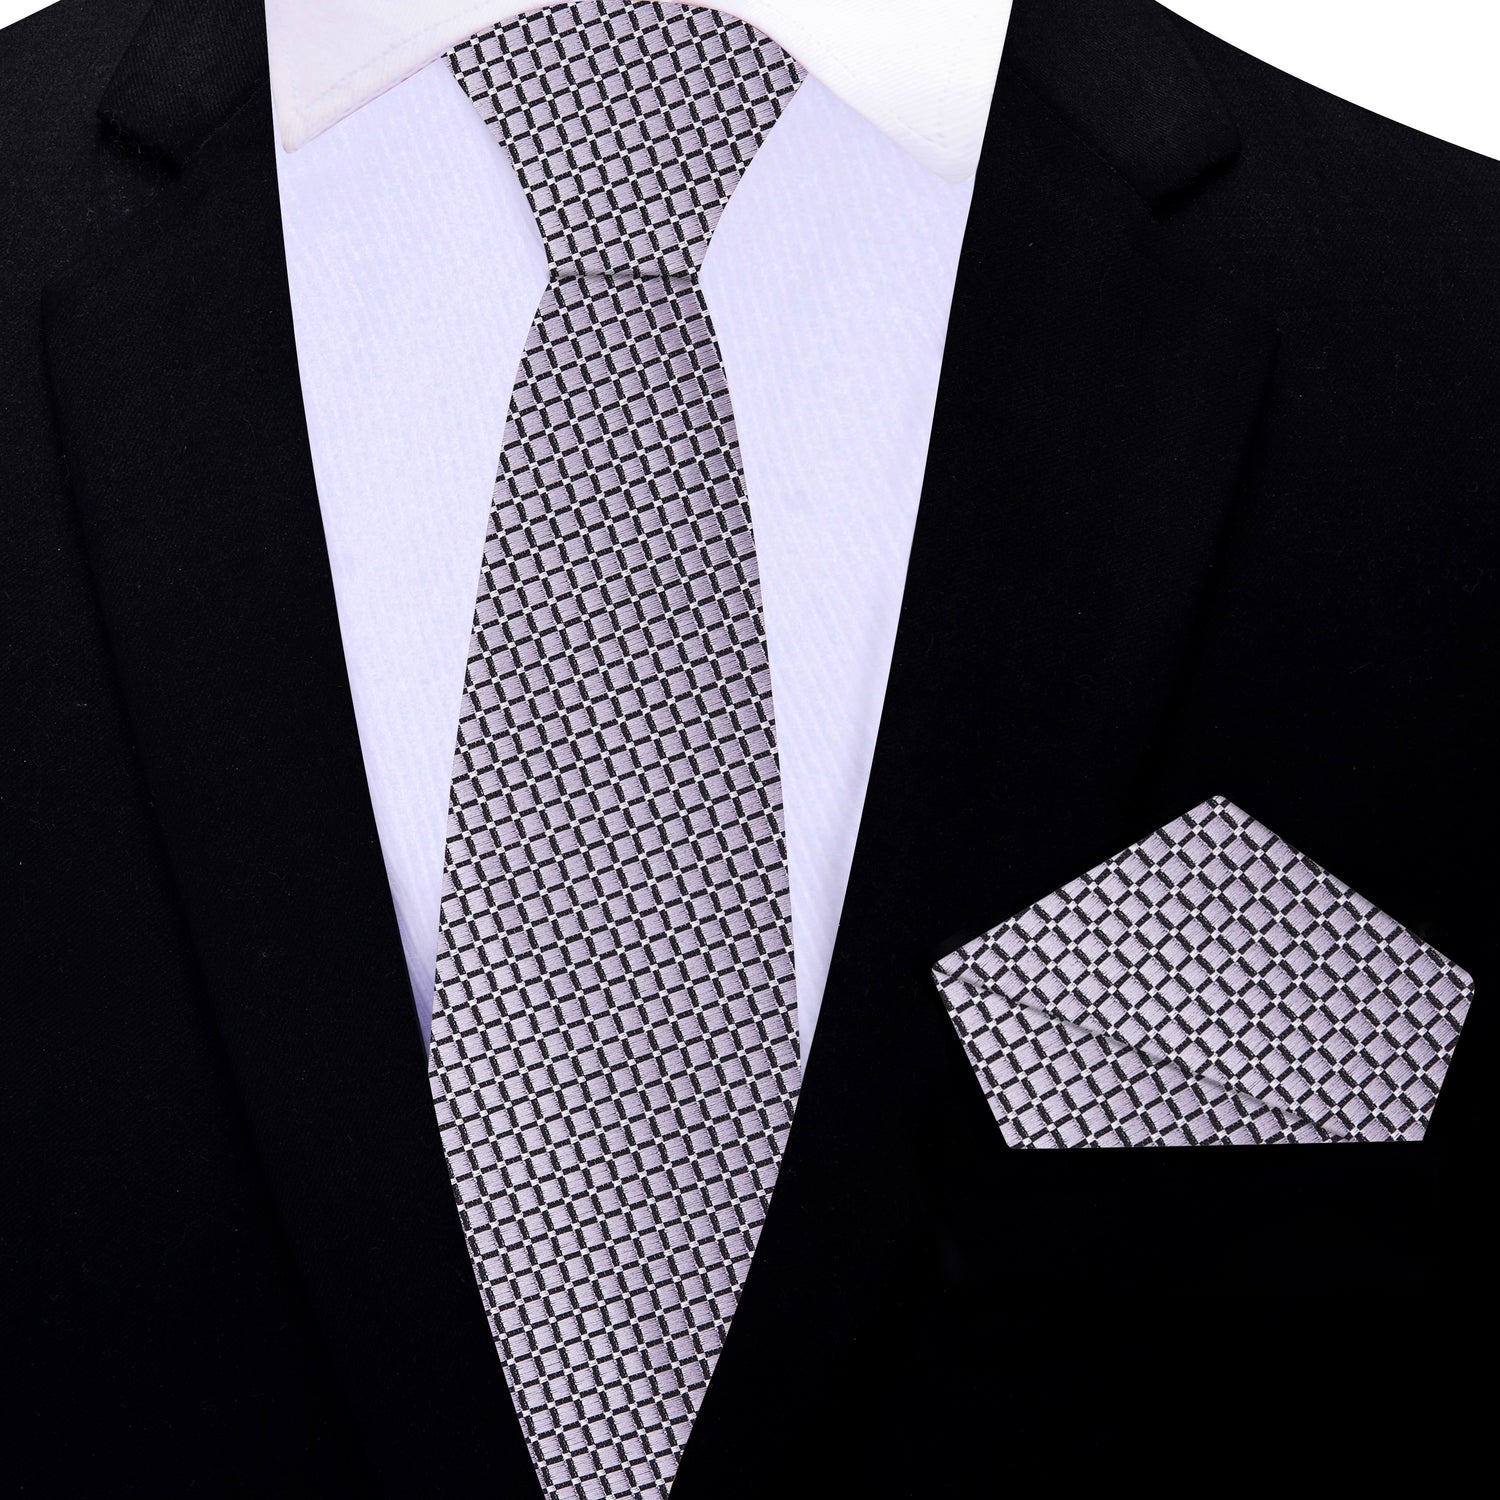 Thin Tie: Metallic Silver Geometric Tie and Matching Square